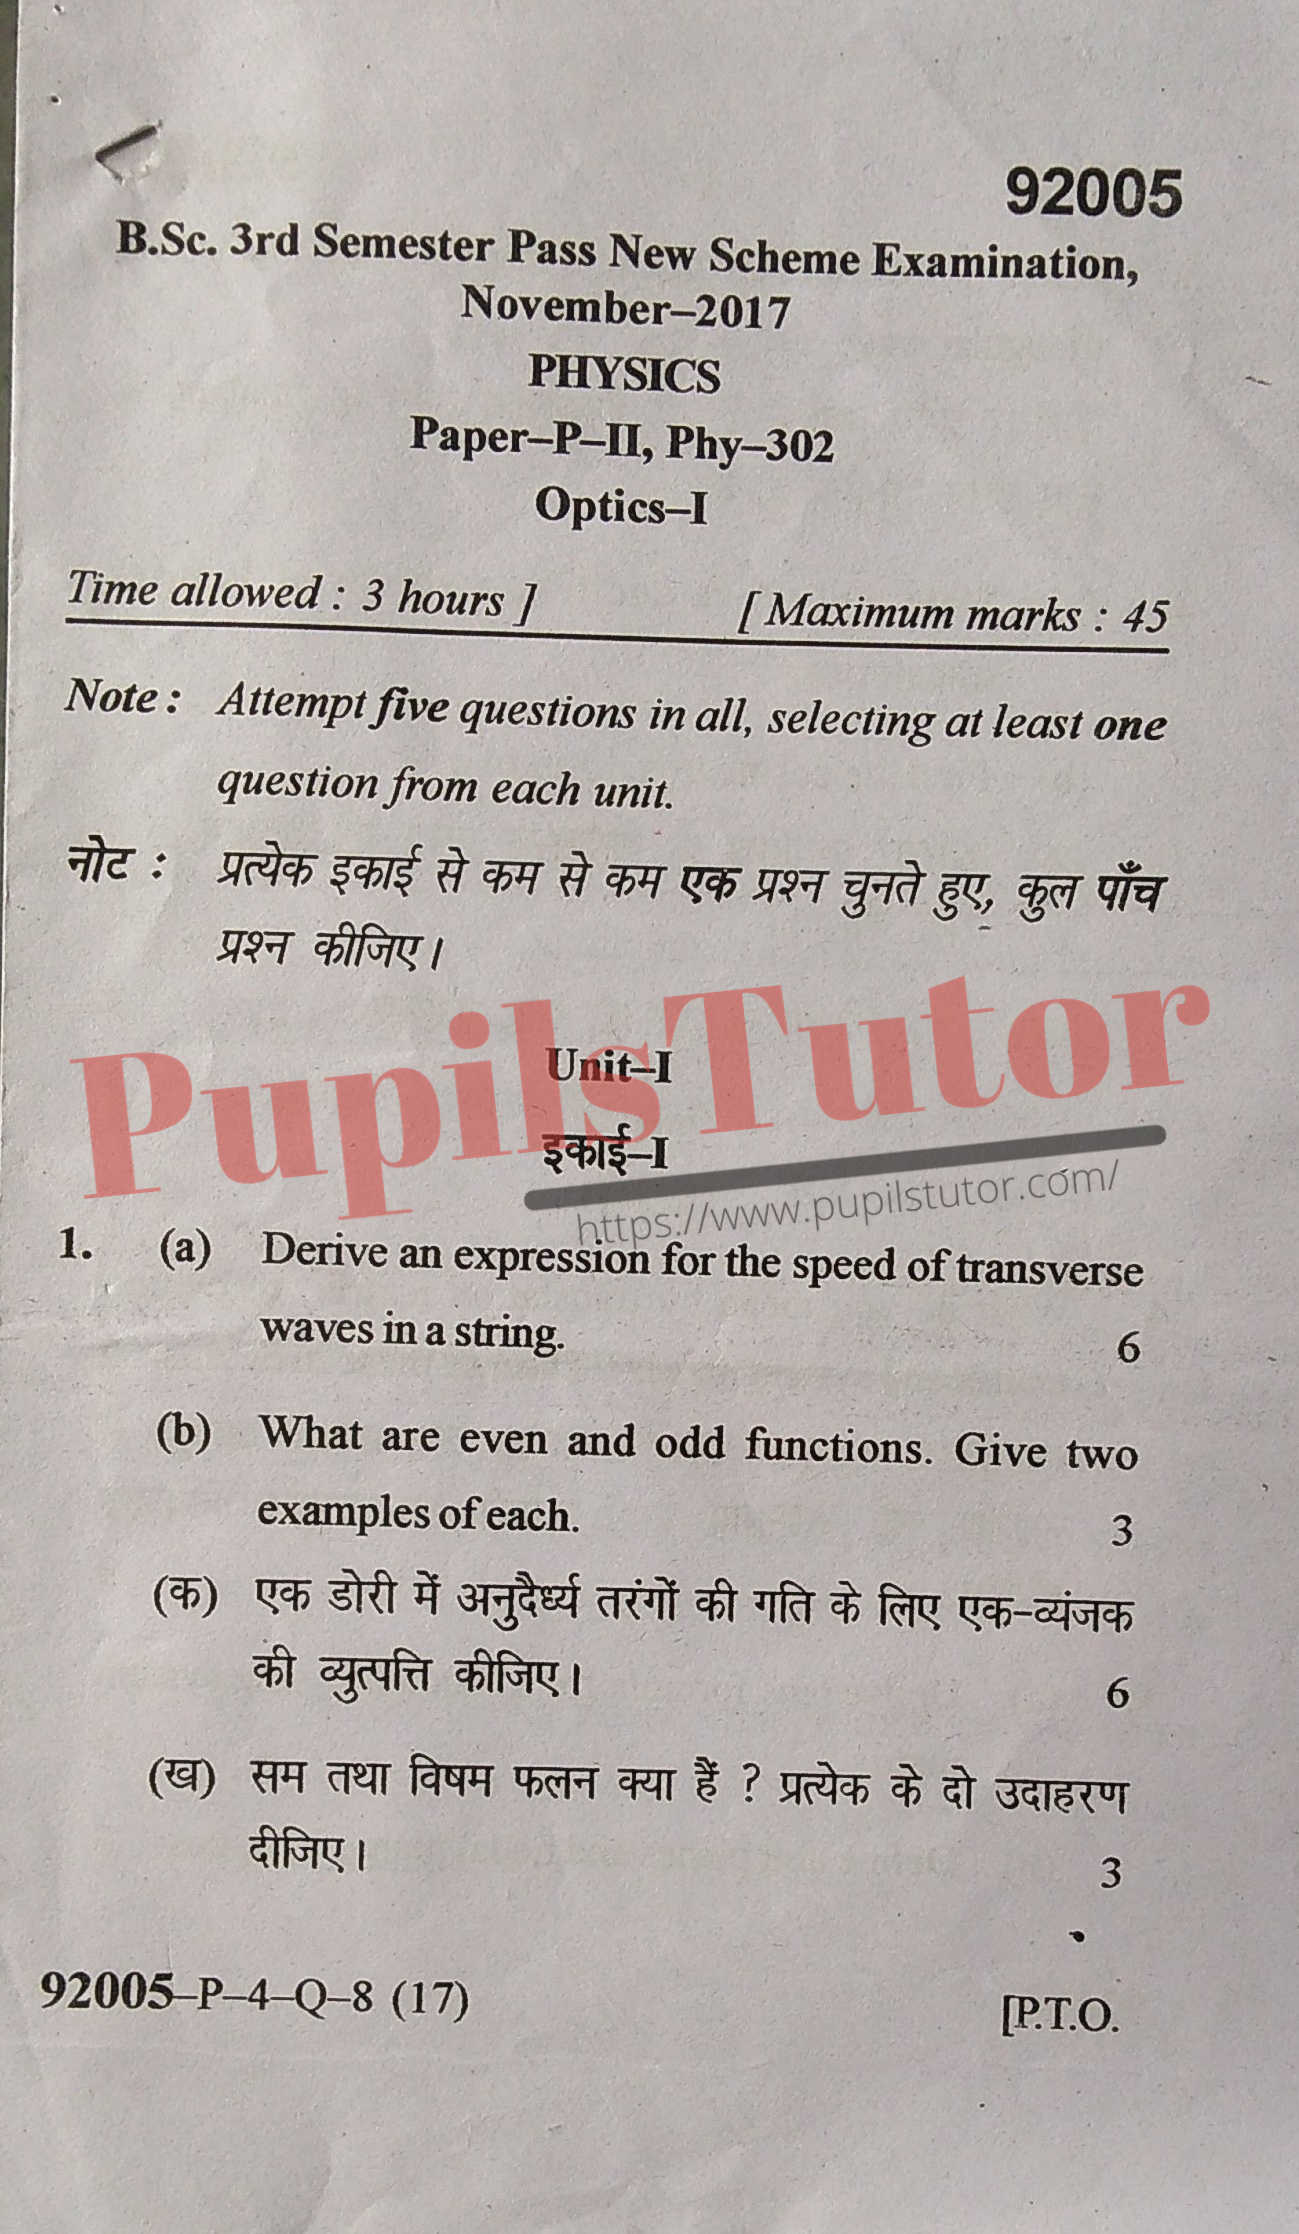 MDU (Maharshi Dayanand University, Rohtak Haryana) BSc Physics Pass Course Third Semester Previous Year Optics Question Paper For November, 2017 Exam (Question Paper Page 1) - pupilstutor.com